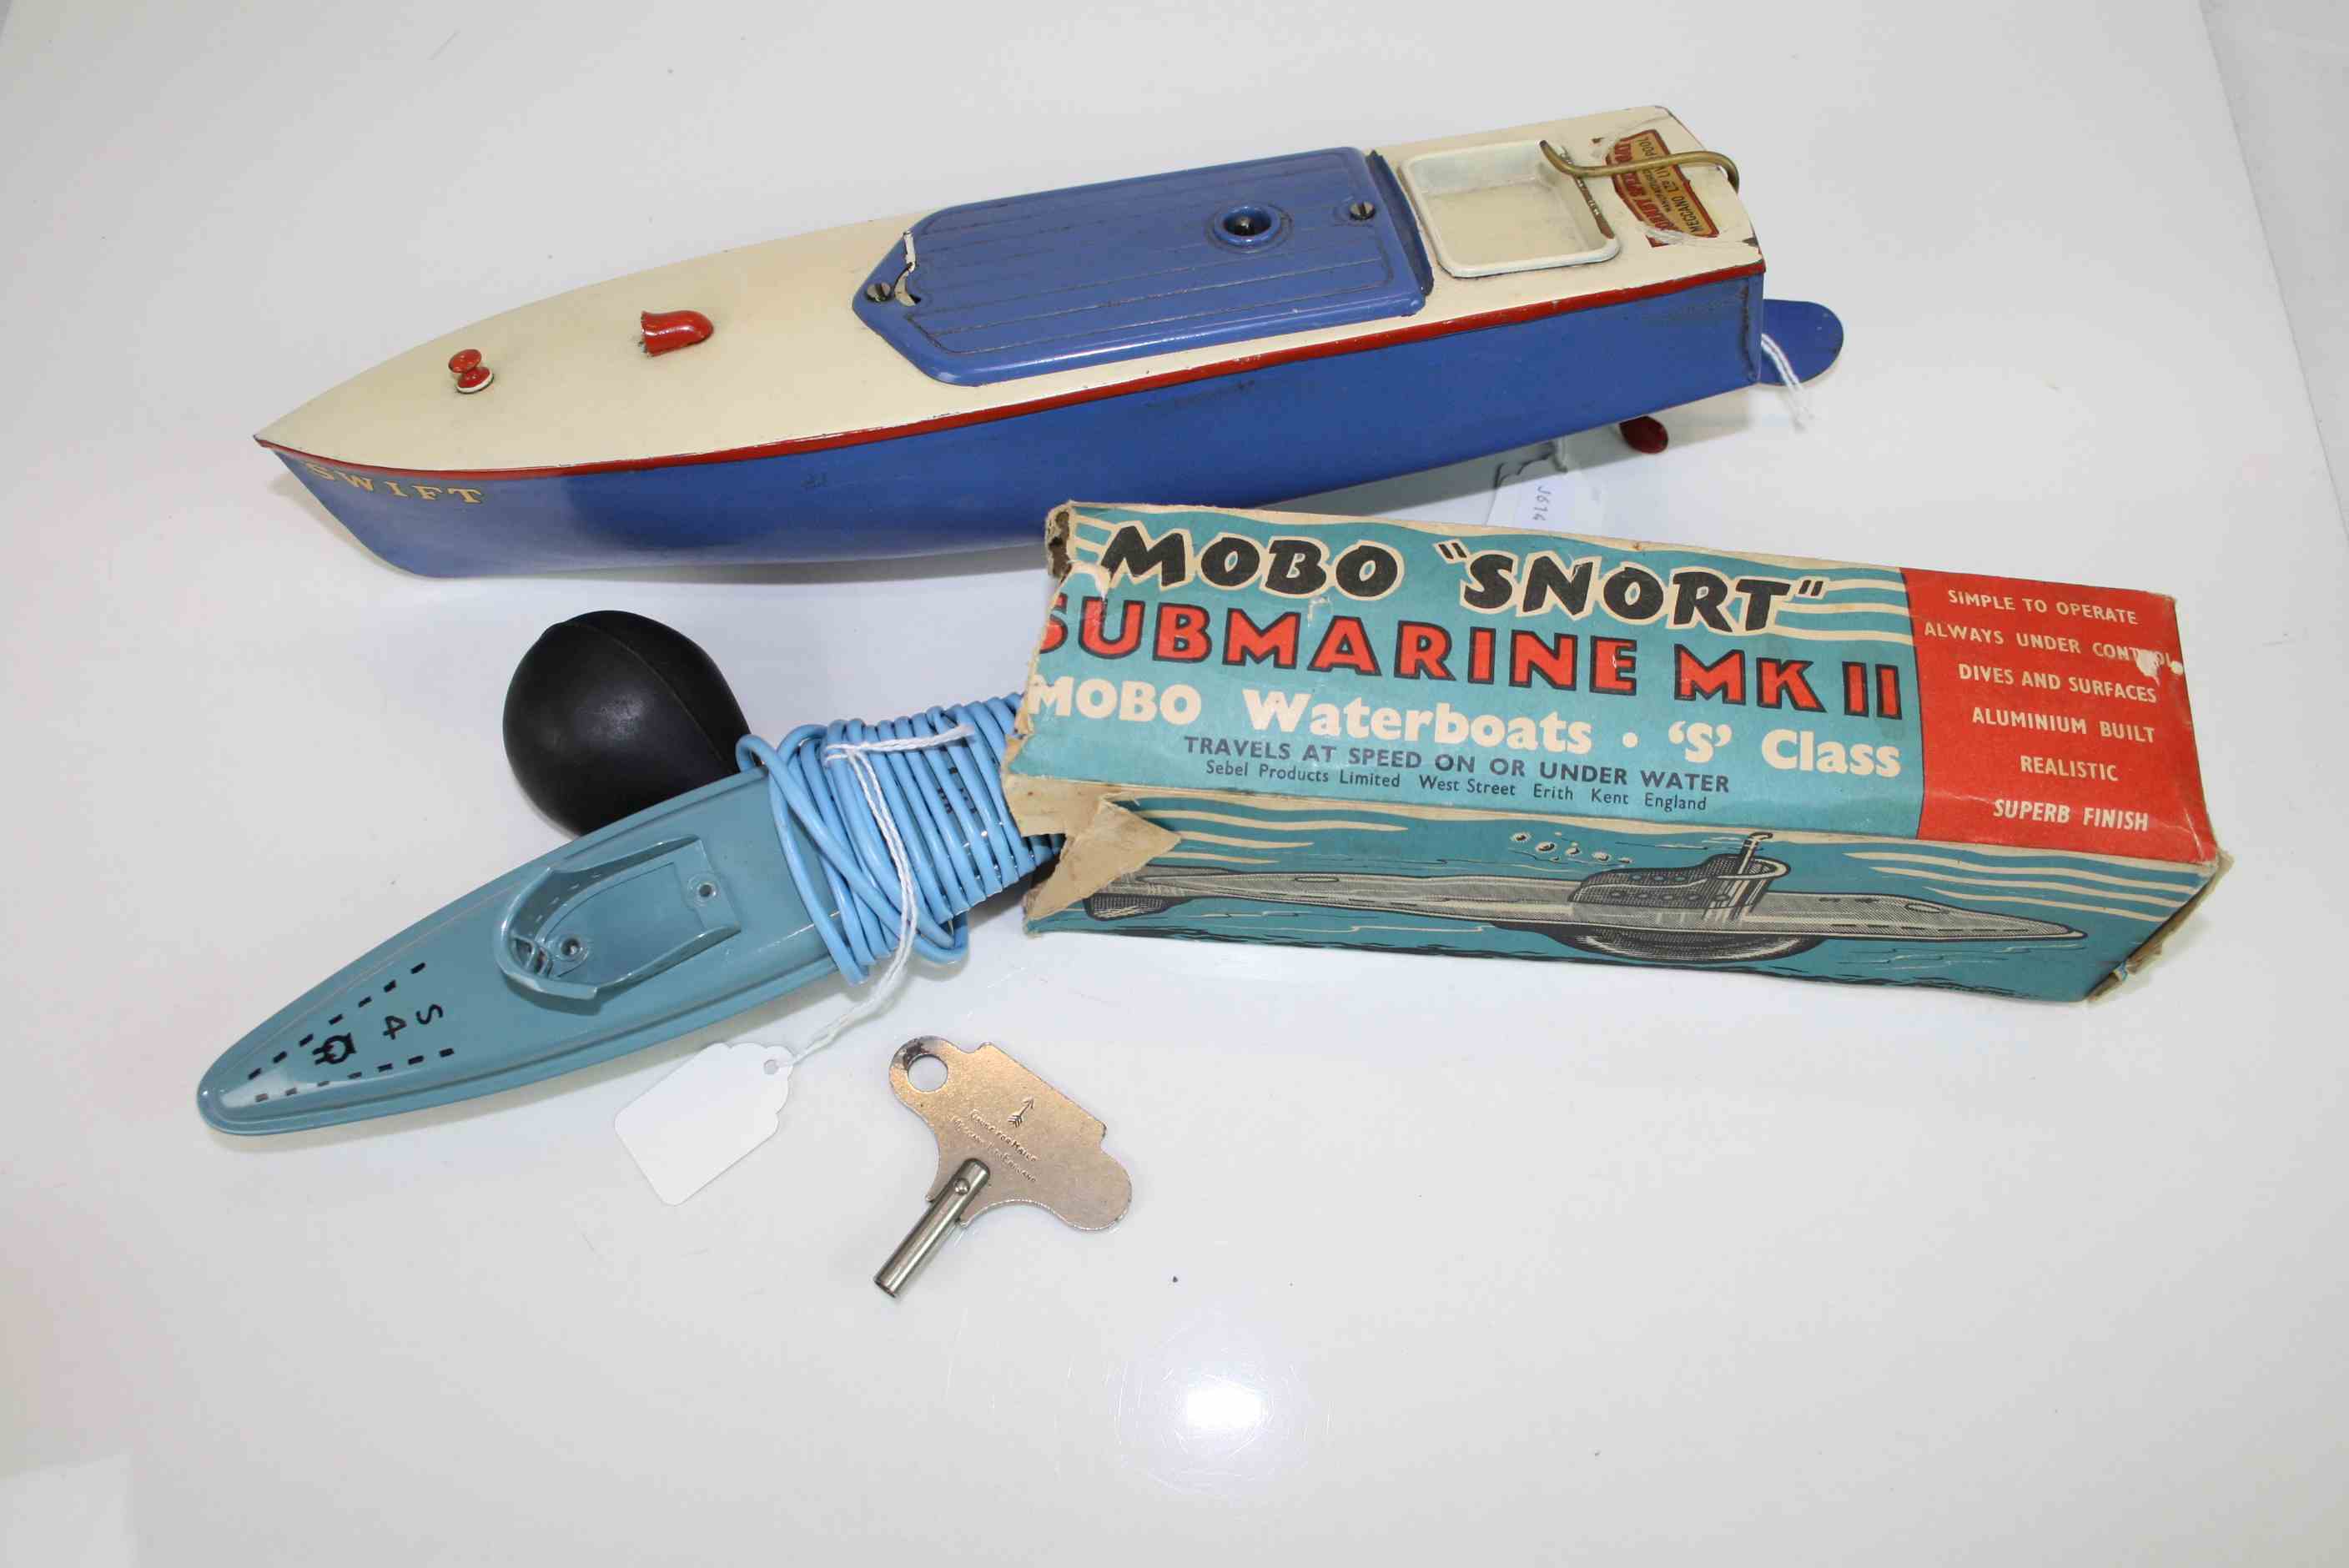 Boxed Hornby Speedboat 'Swift' and a boxed Mobo Snort Submarine mk II S Class with accessories (2) - Image 2 of 3